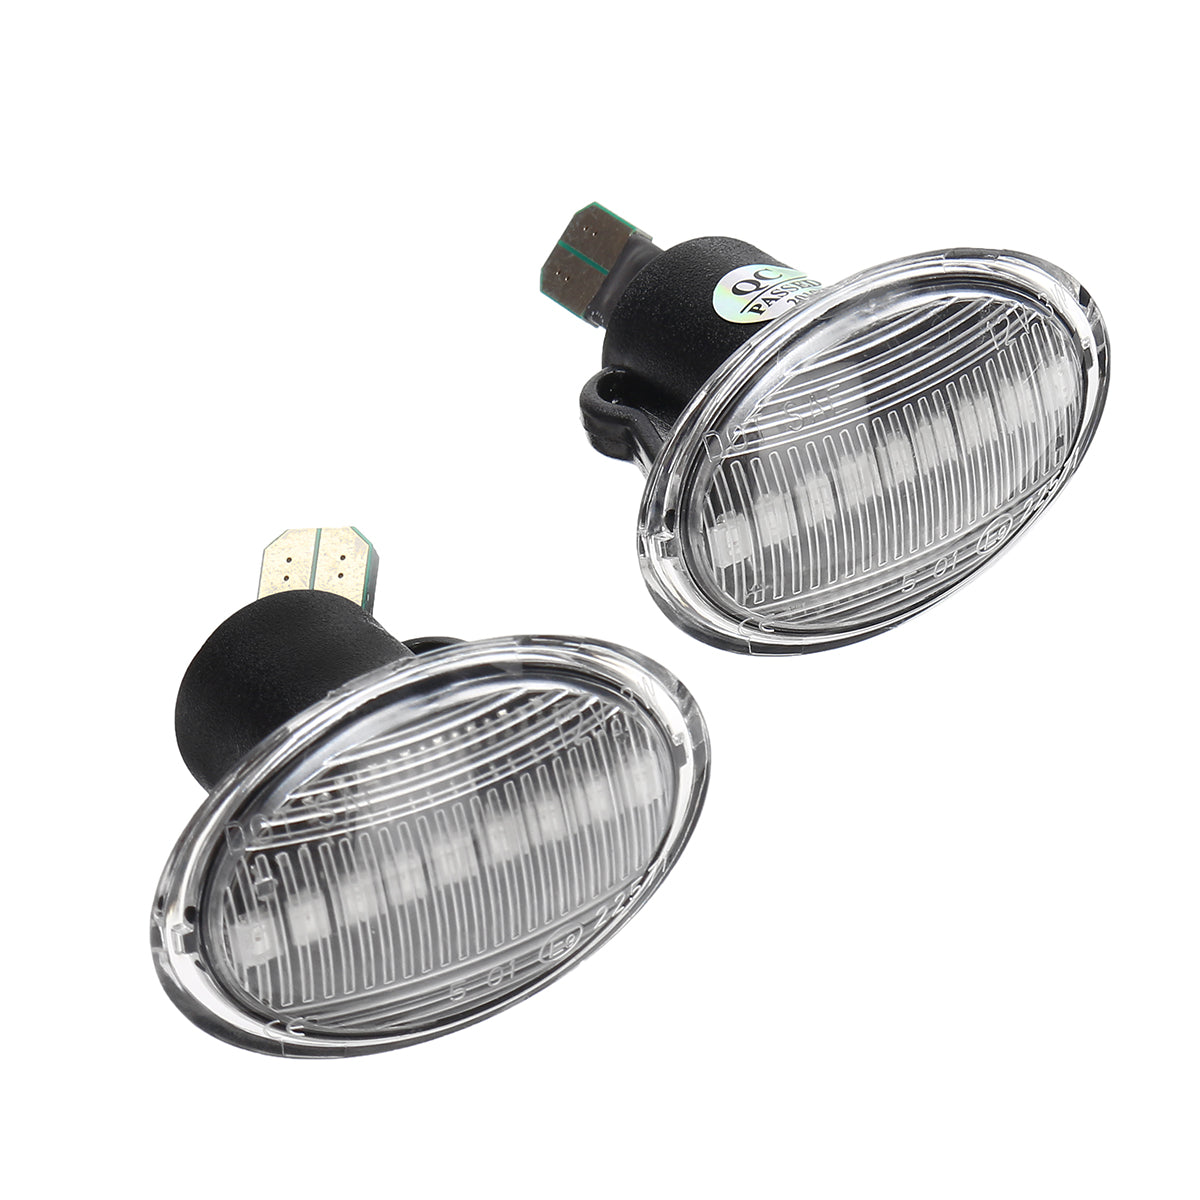 Dark Gray 2PCS LED Side Marker Lights Indicator Repeaters Bulbs Amber for Fiat 500 500c Abarth